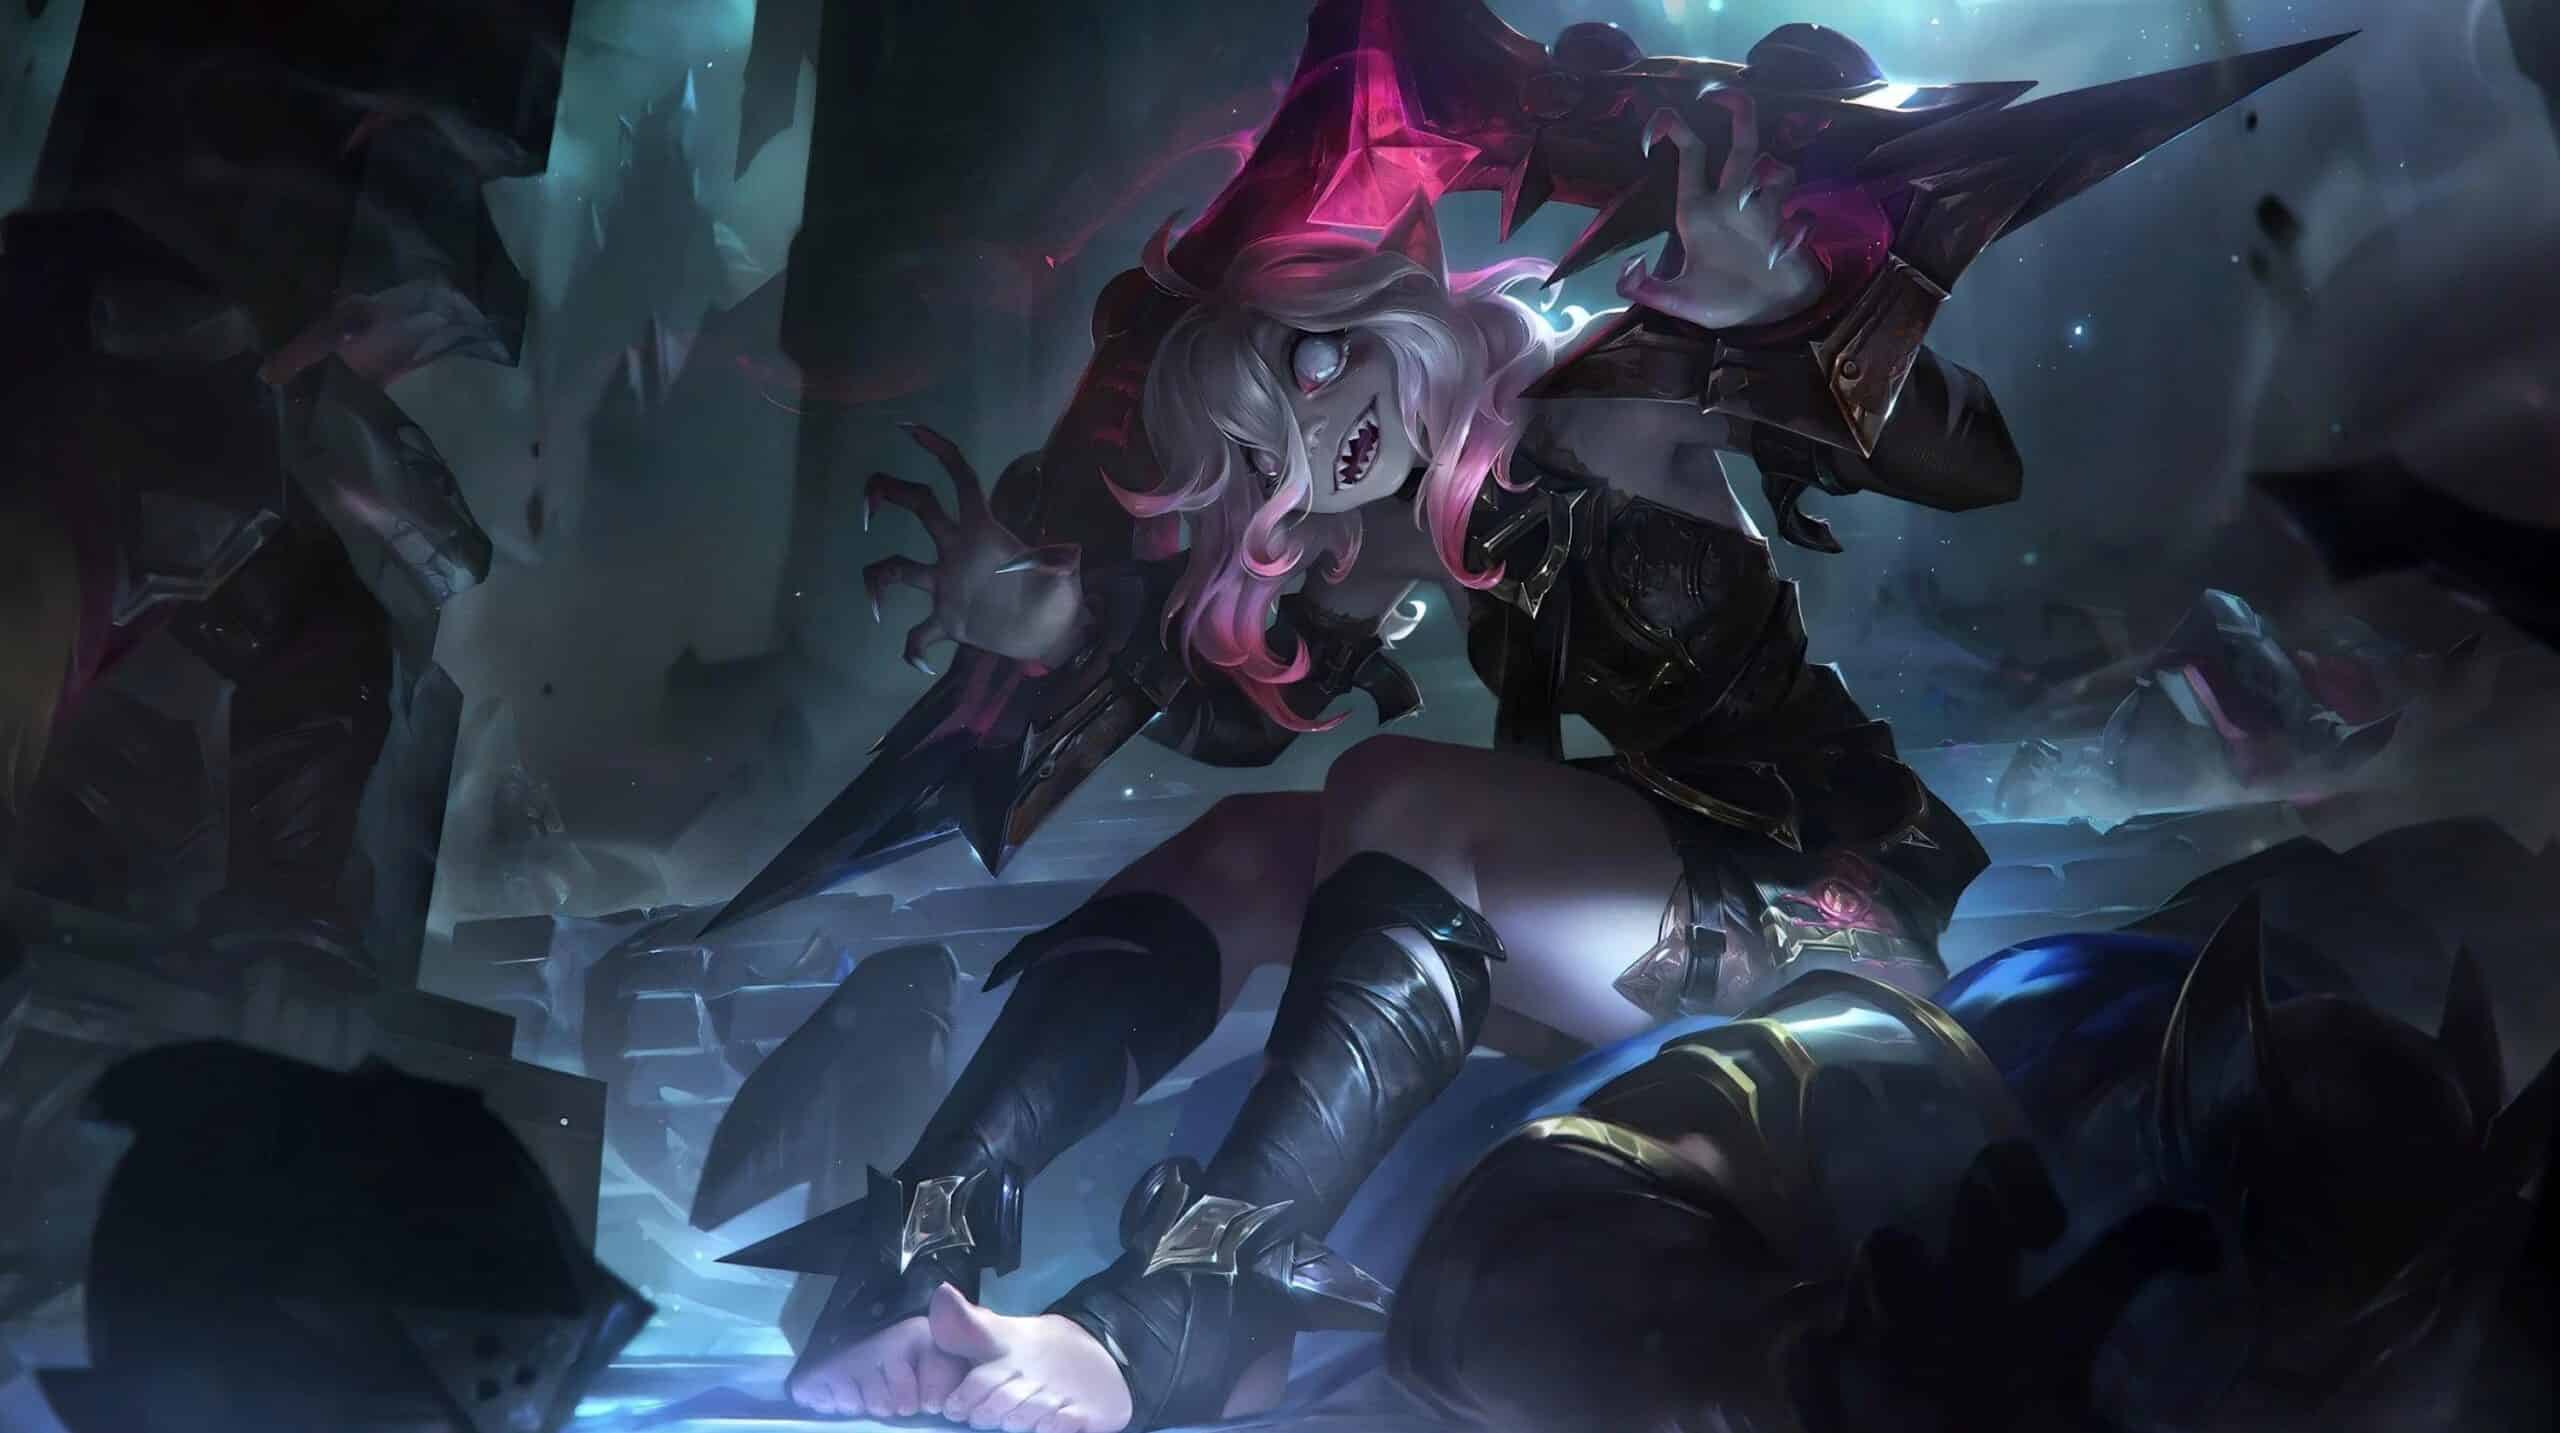 League of Legends Briar Win Rate Spikes Tremendously